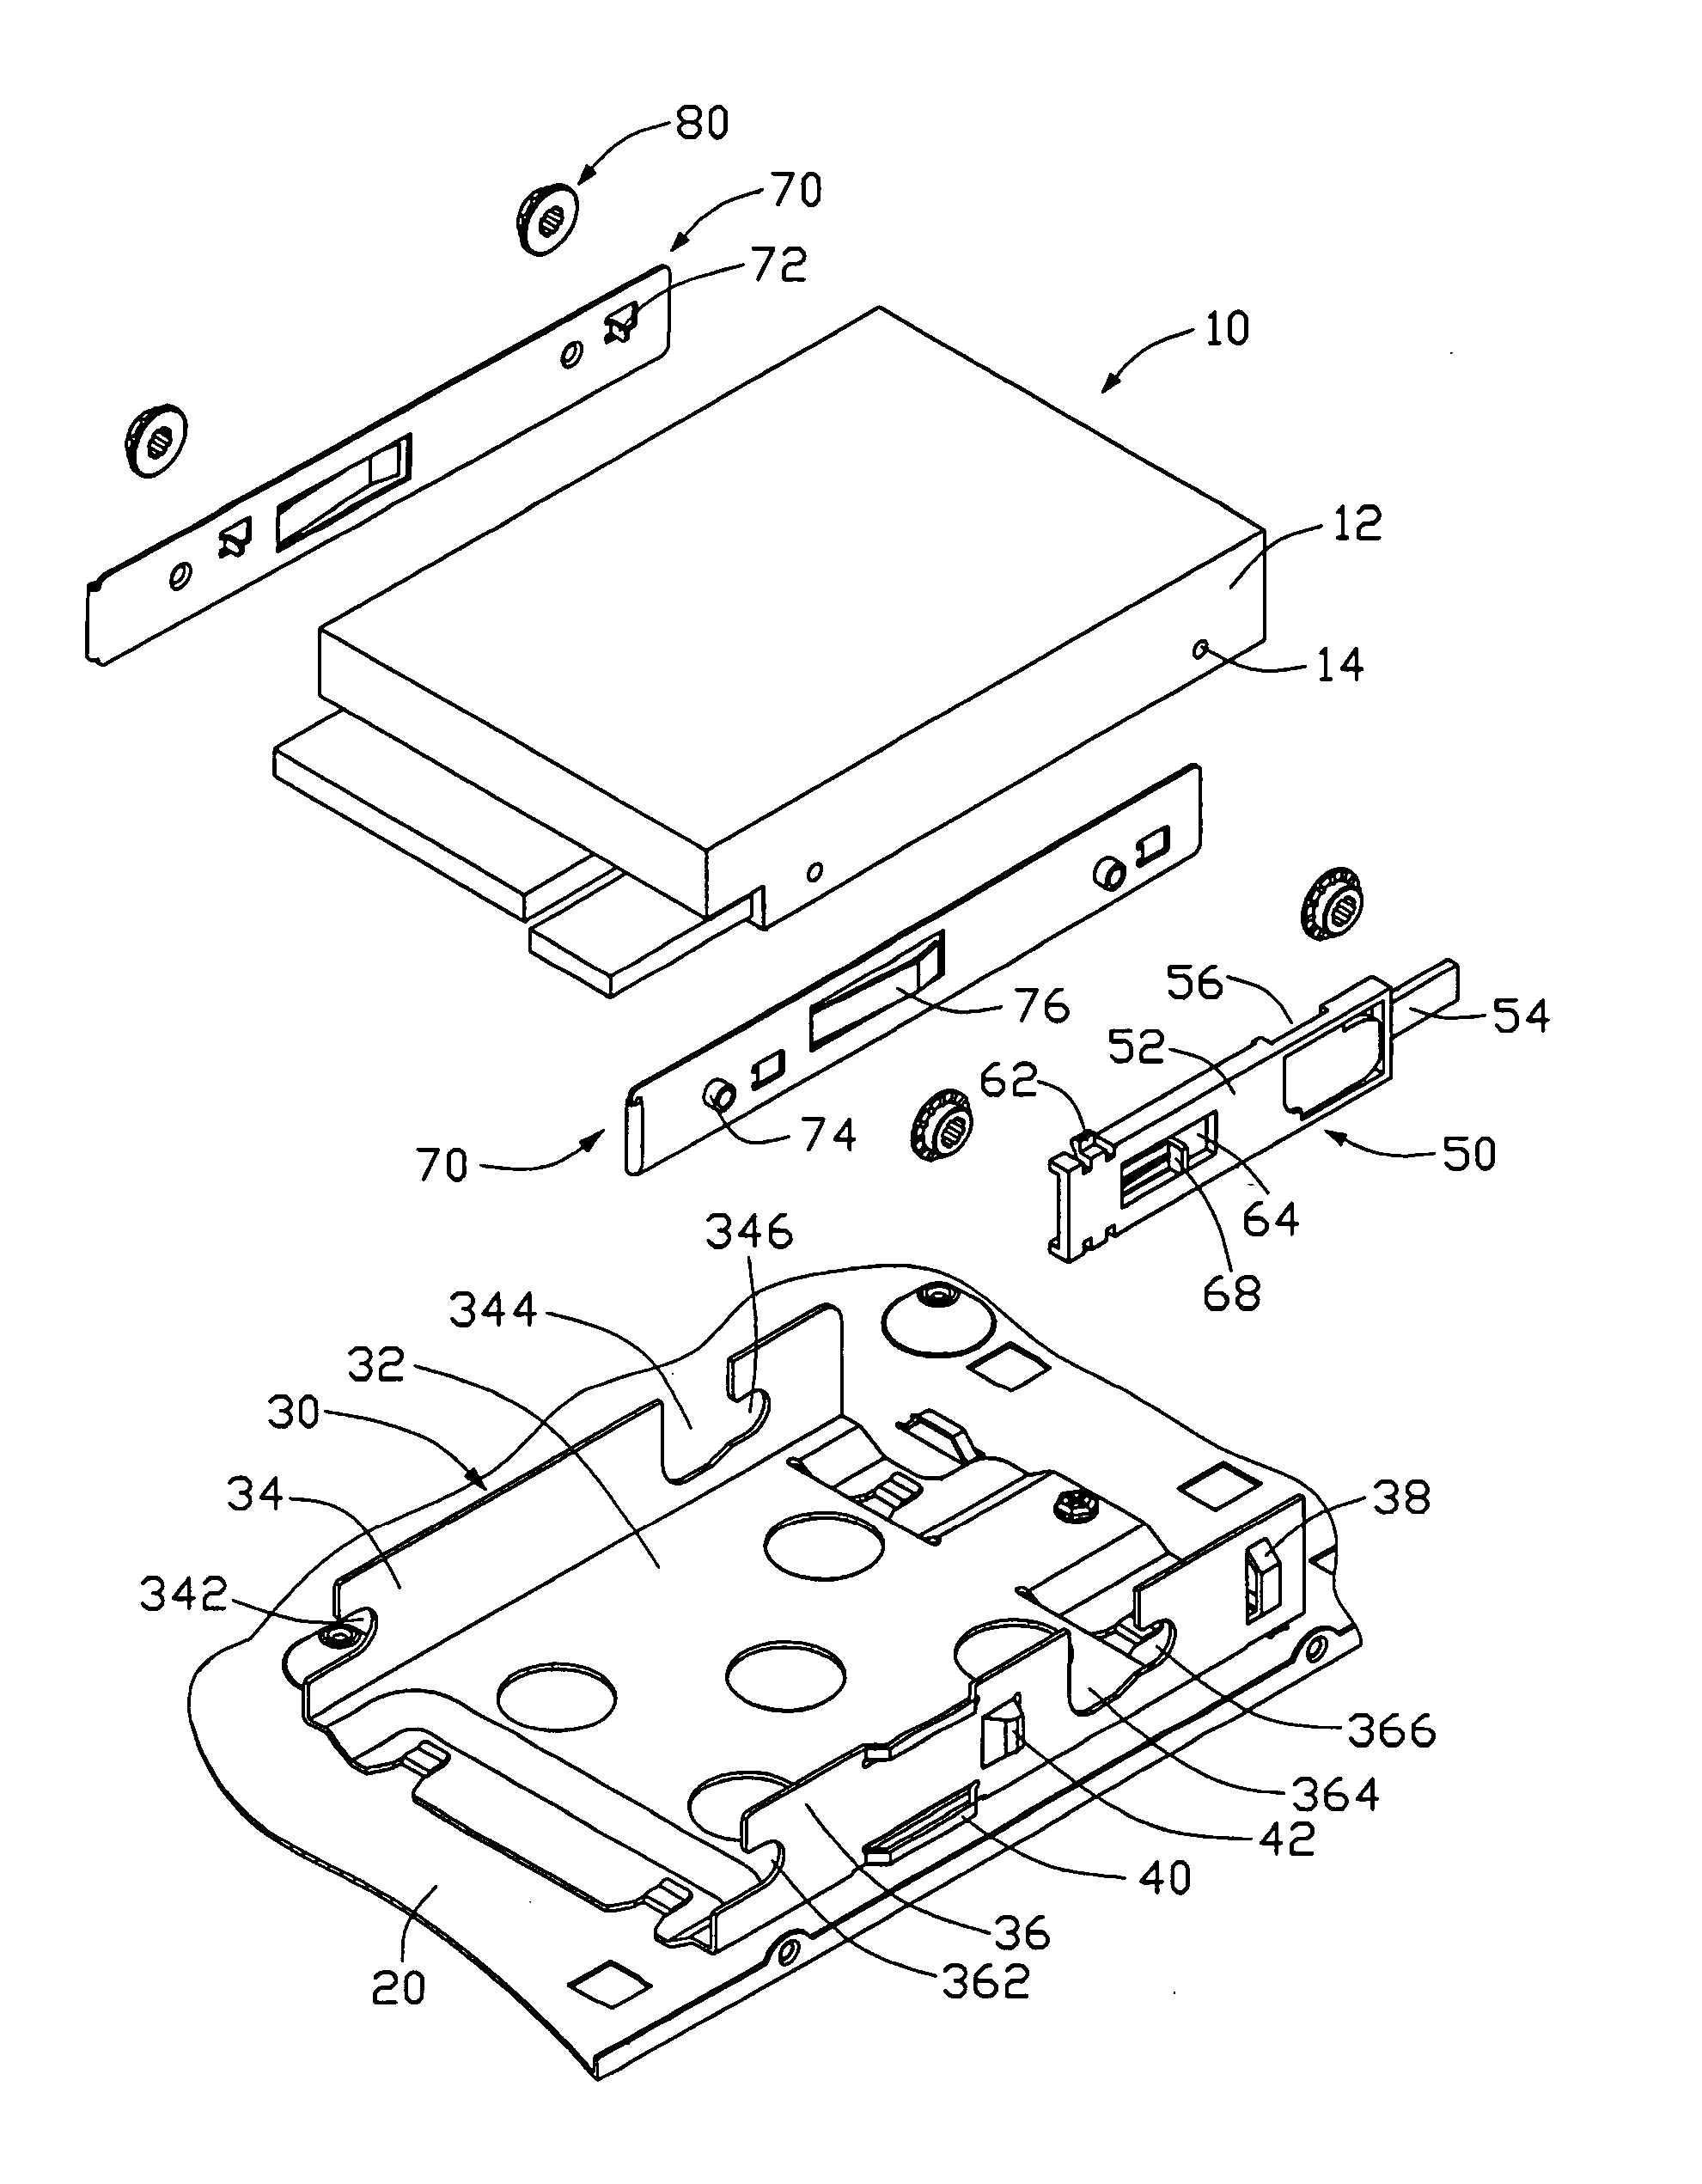 Mounting apparatus for disk drive devices